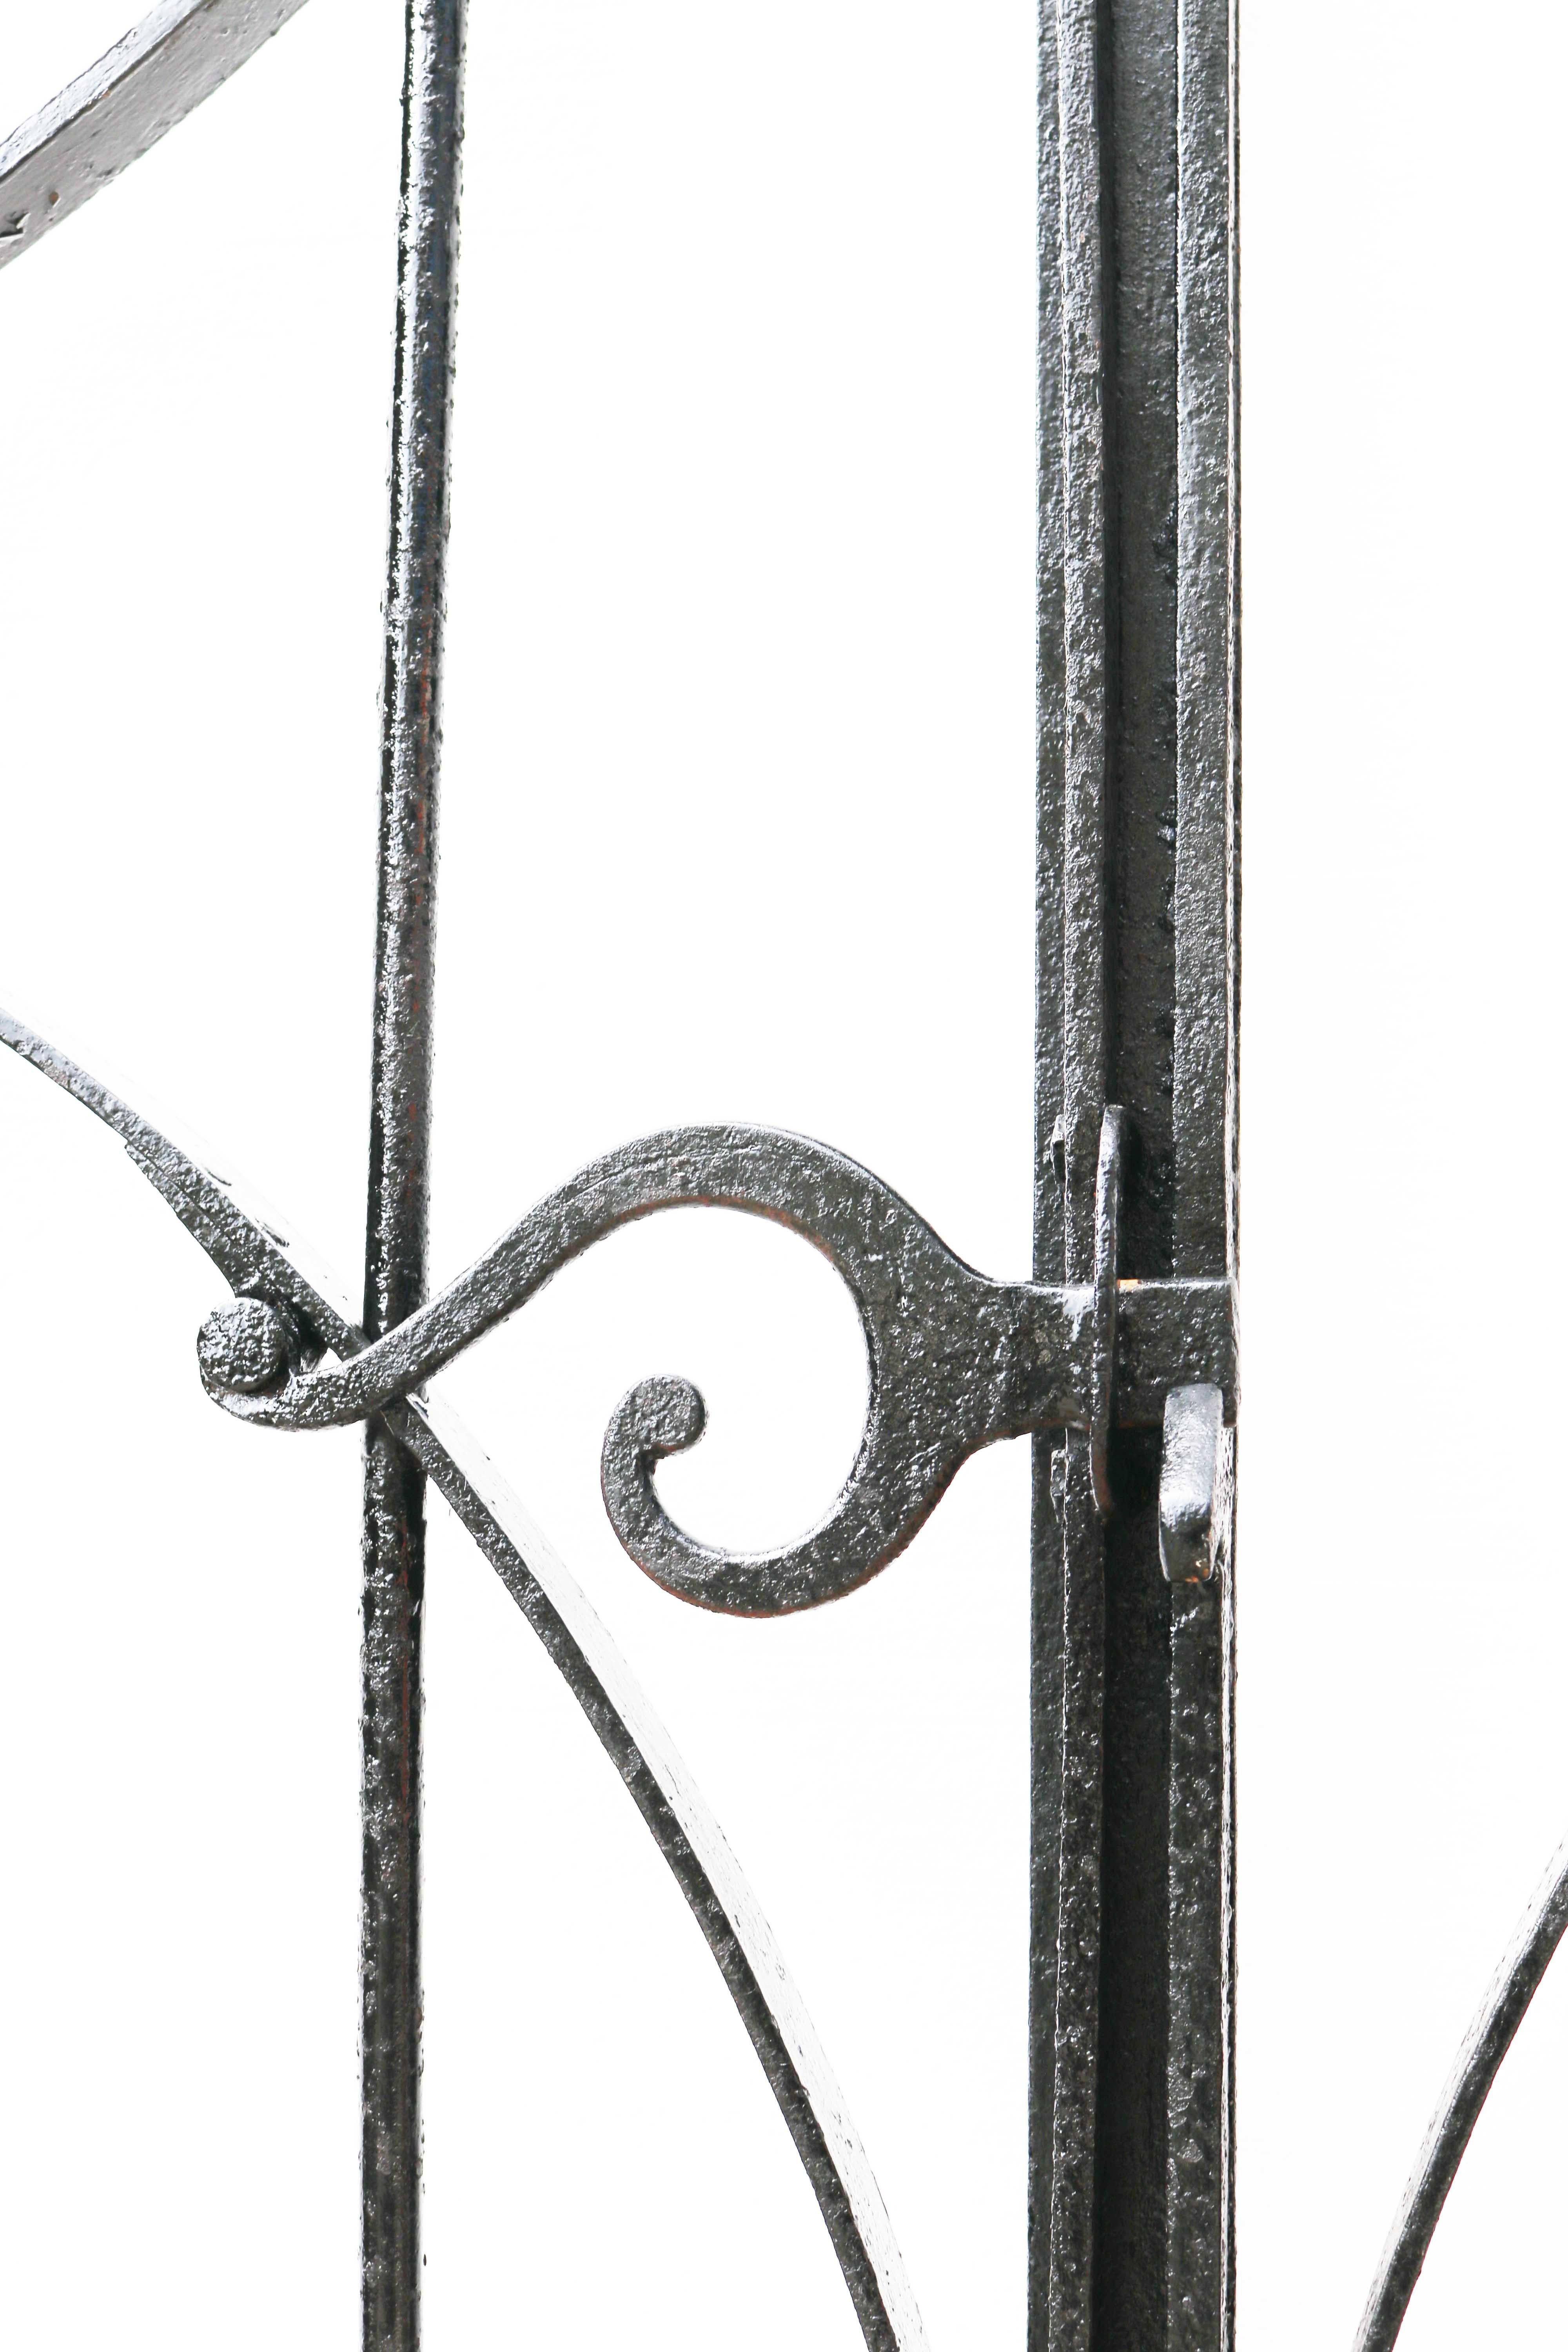 English Pair of Antique Wrought Iron Drive Gates